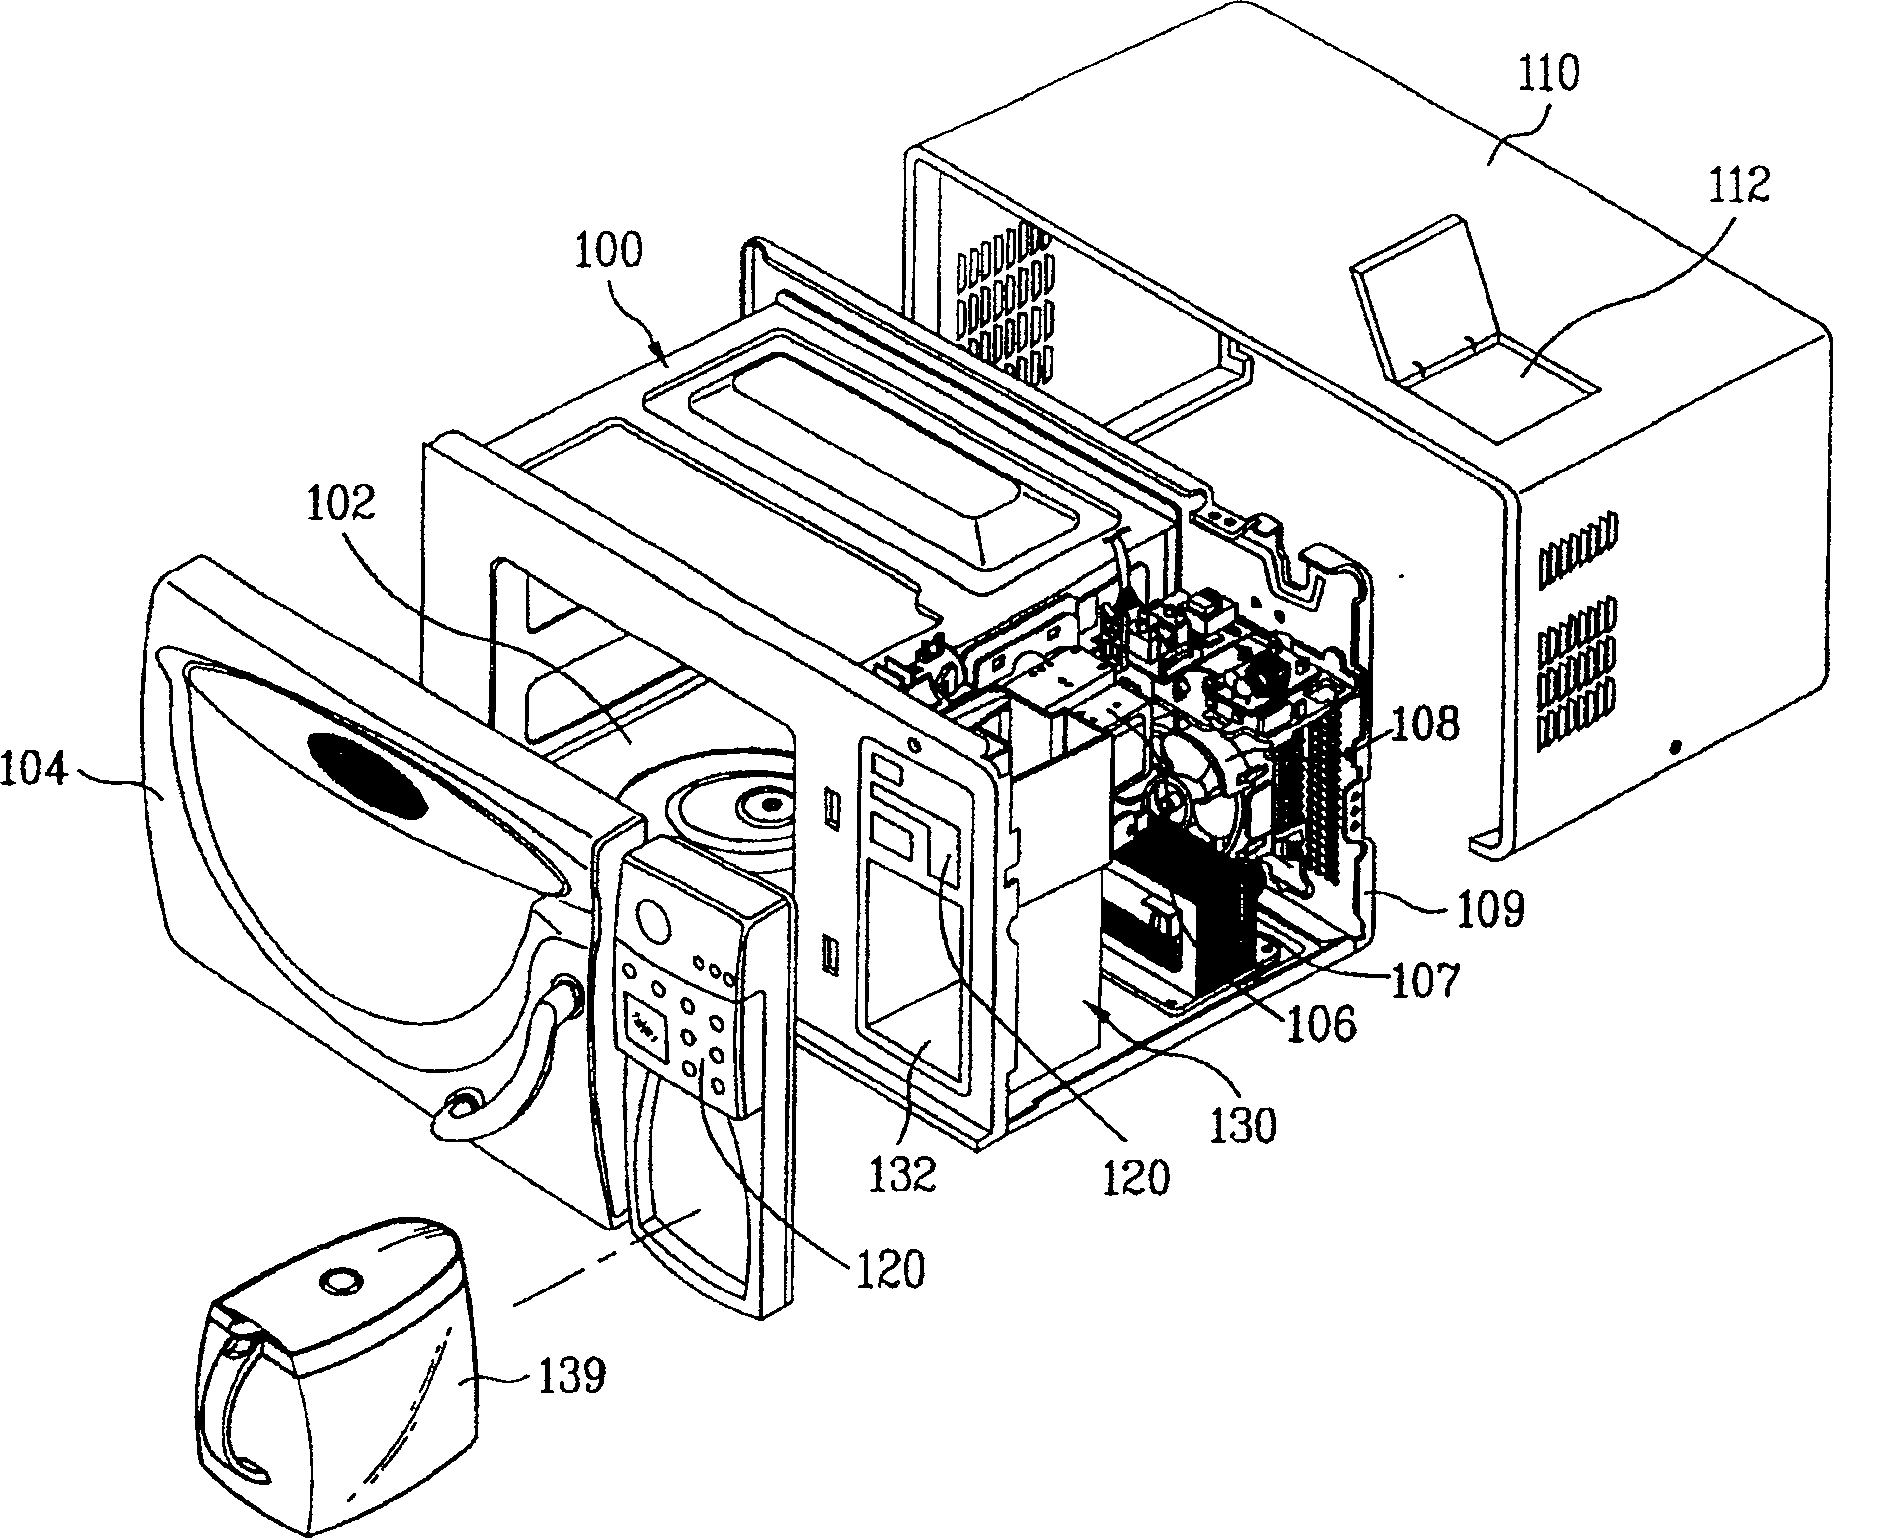 Microwave oven with coffee making device